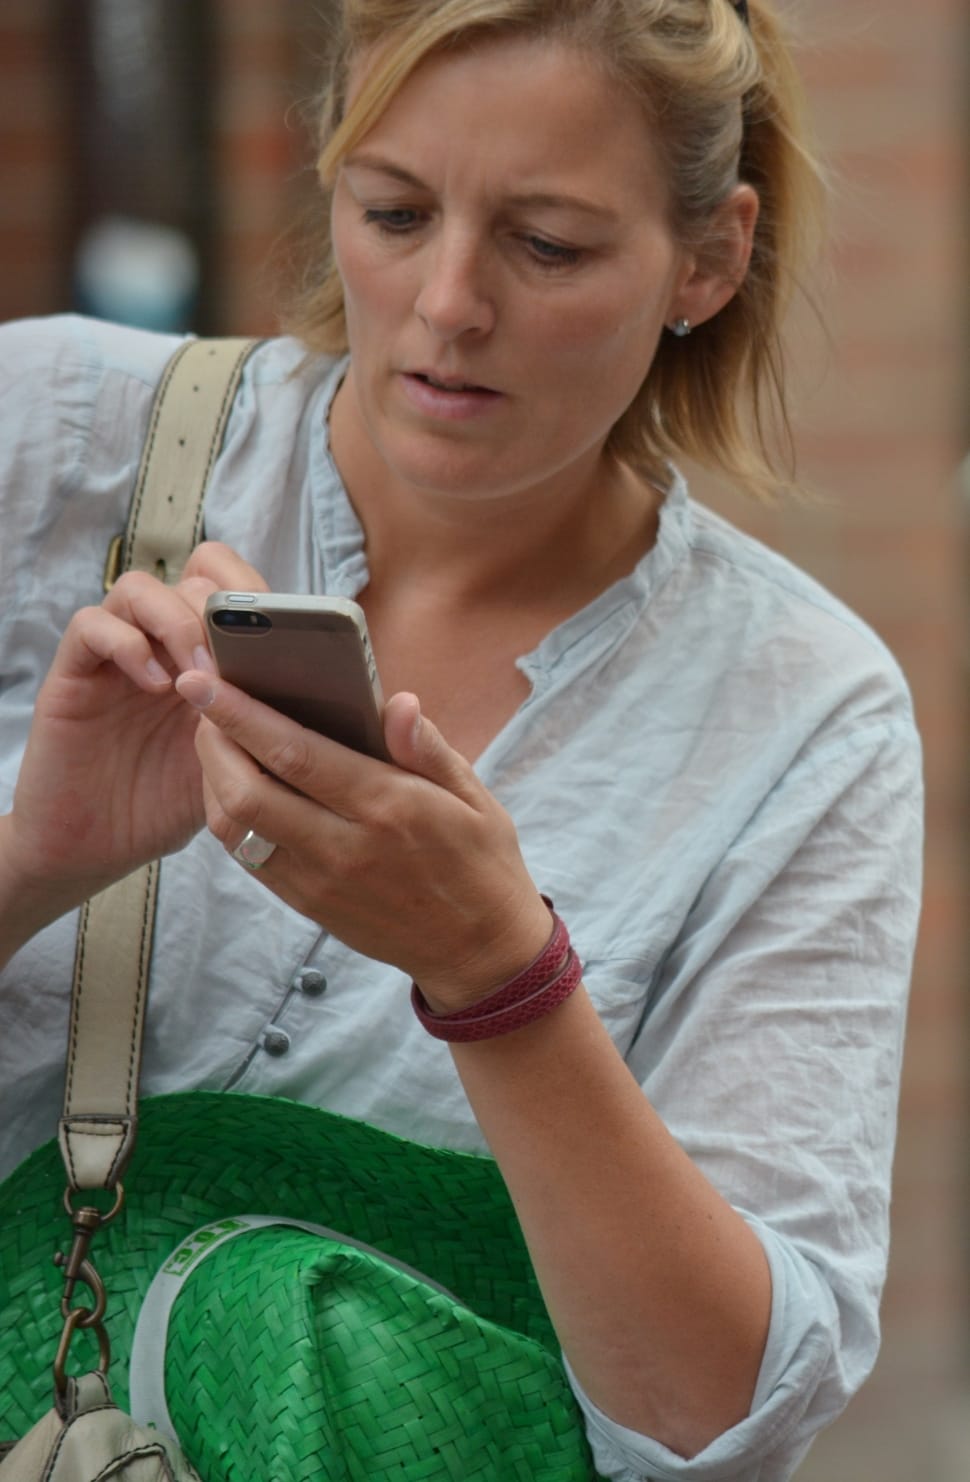 A mom using a smartphone to contact her family